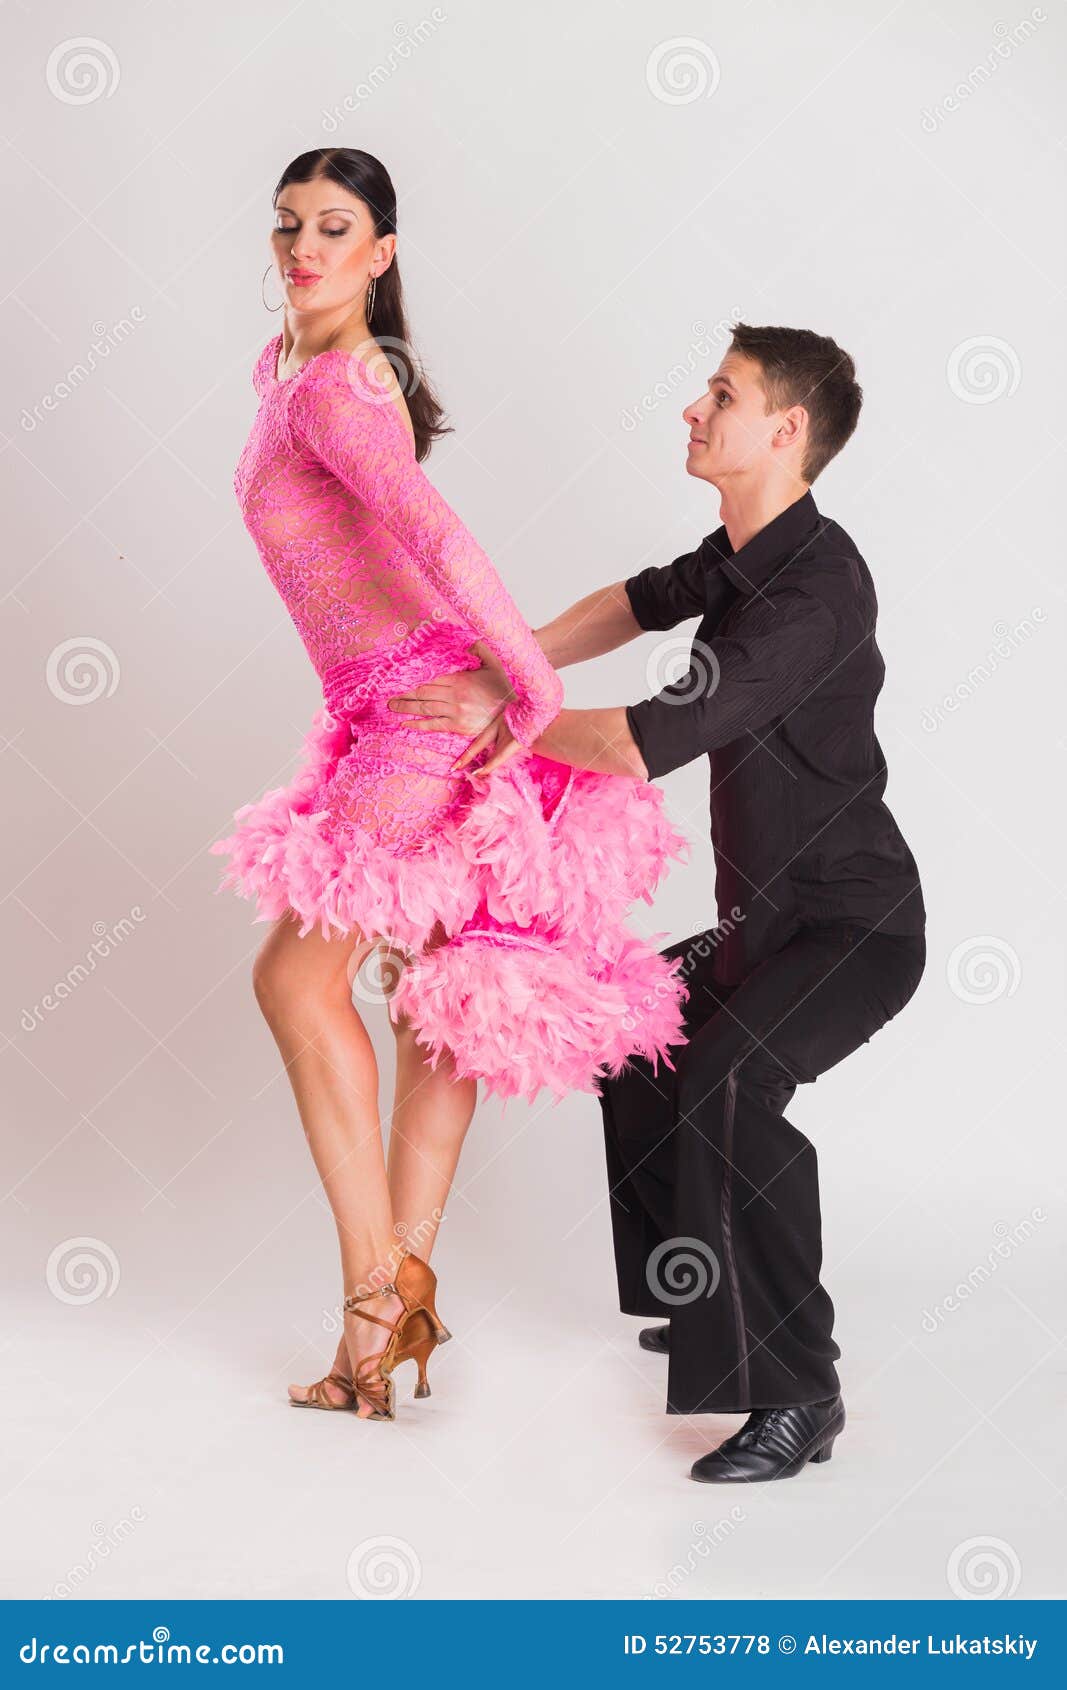 What to Look for in a Ballroom Dance Instructor